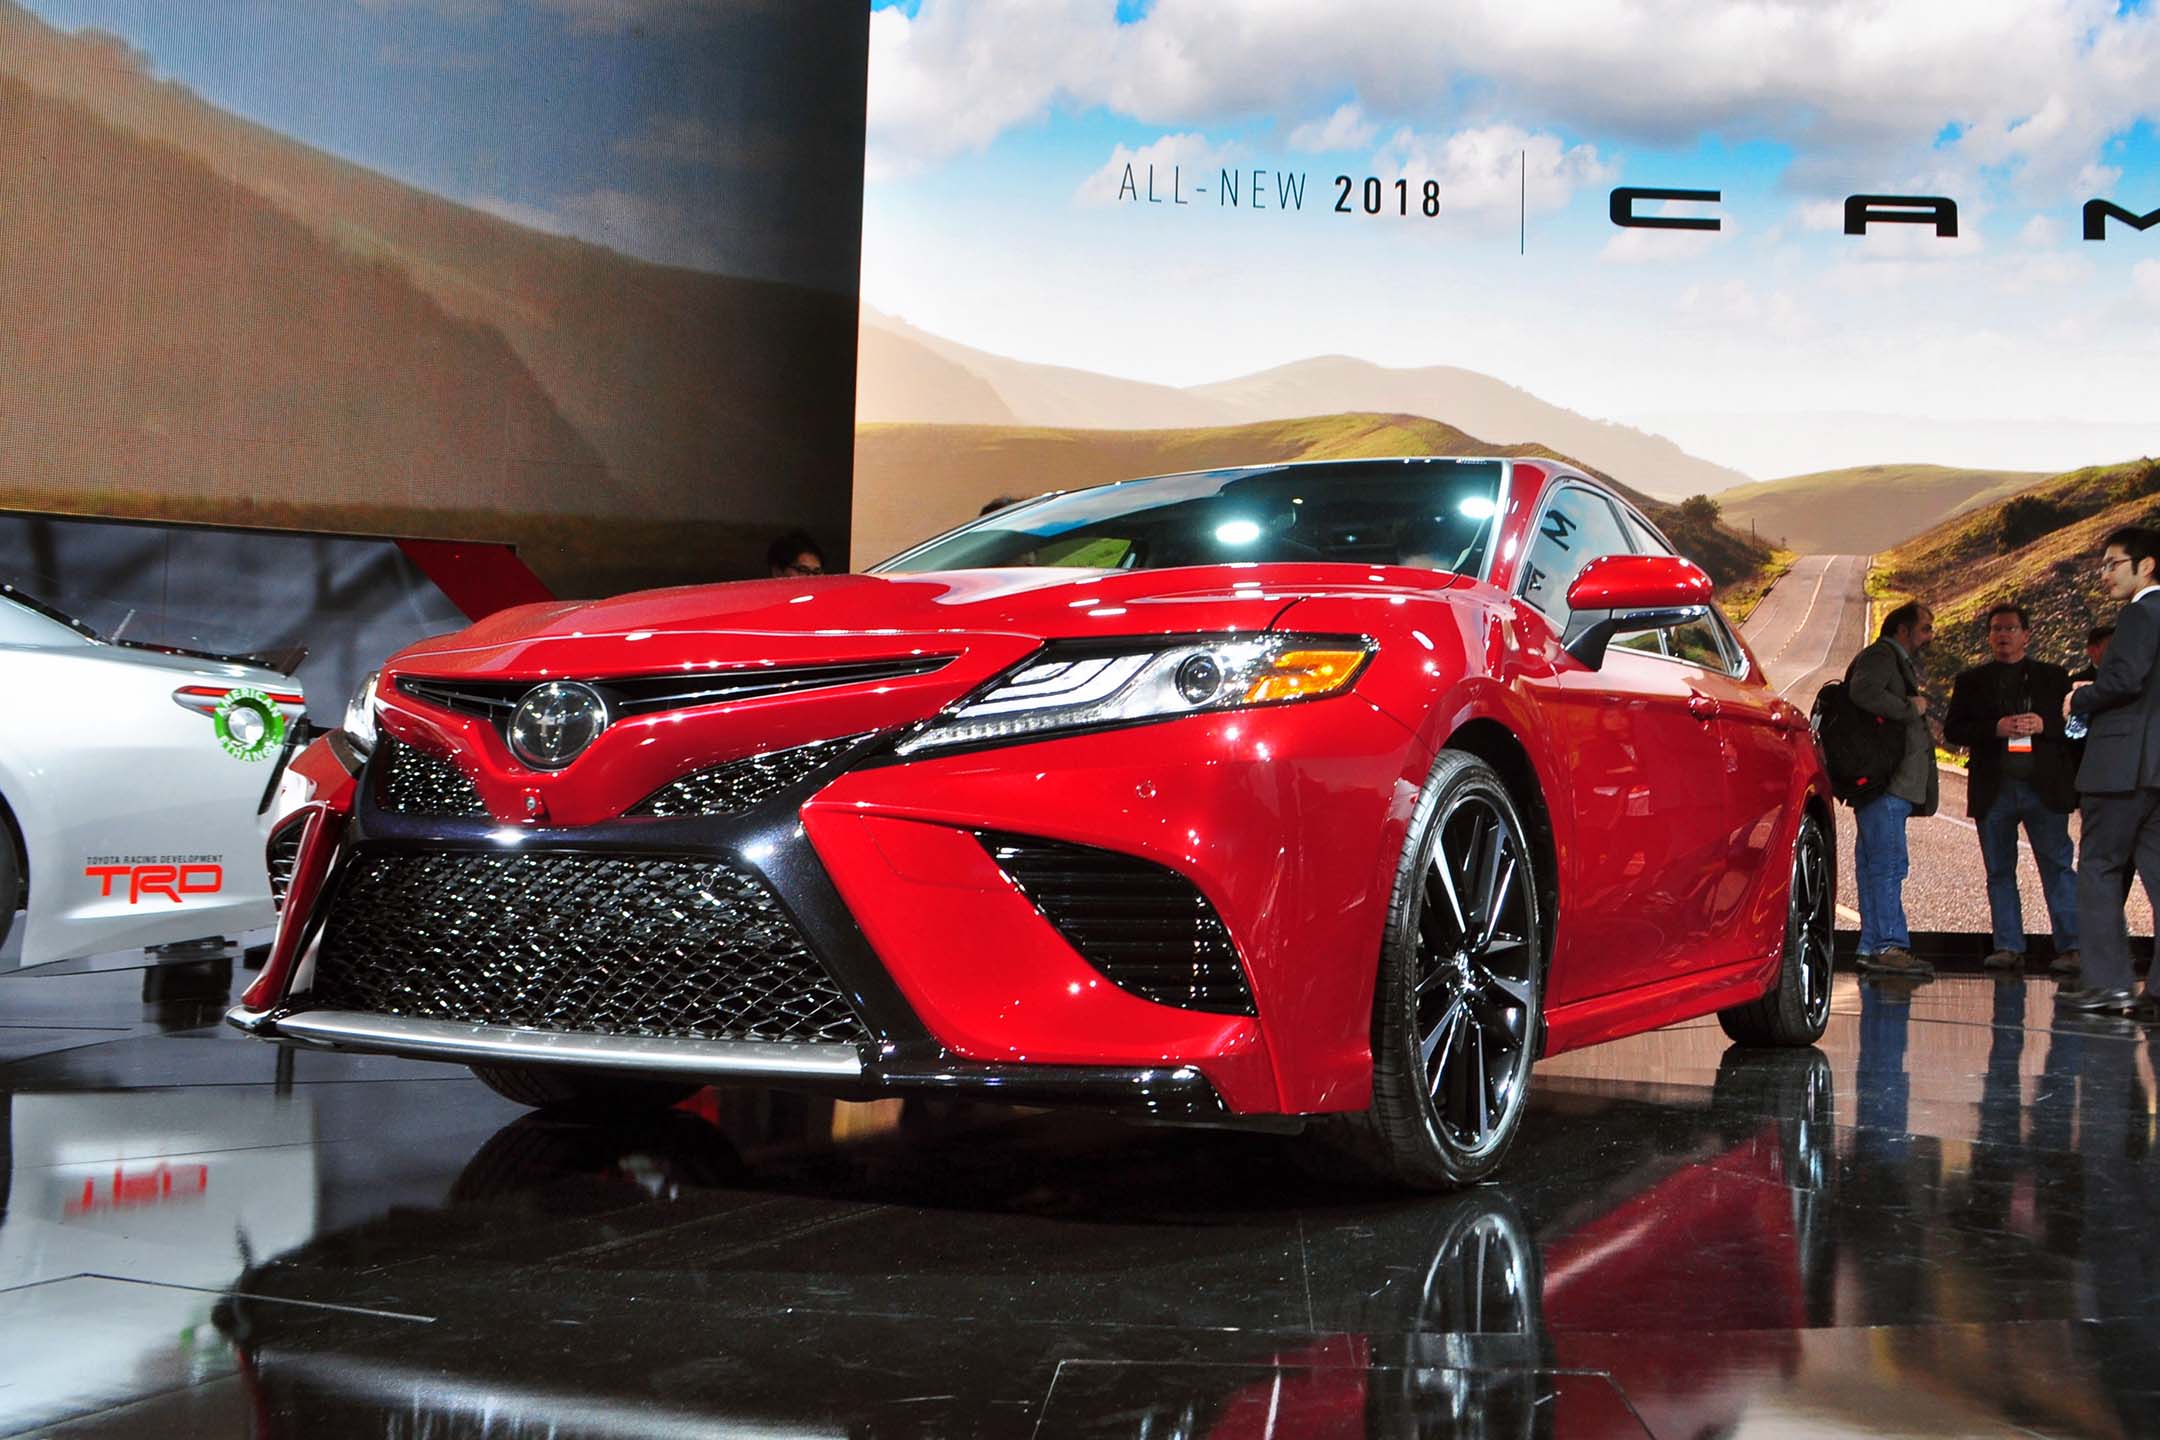 Sabrina Giacomini: The bestselling car in North America finally got a worthy design. Reliability doesn’t have to look boring and I’m happy to see that Toyota found a balance between boldness and refinement.